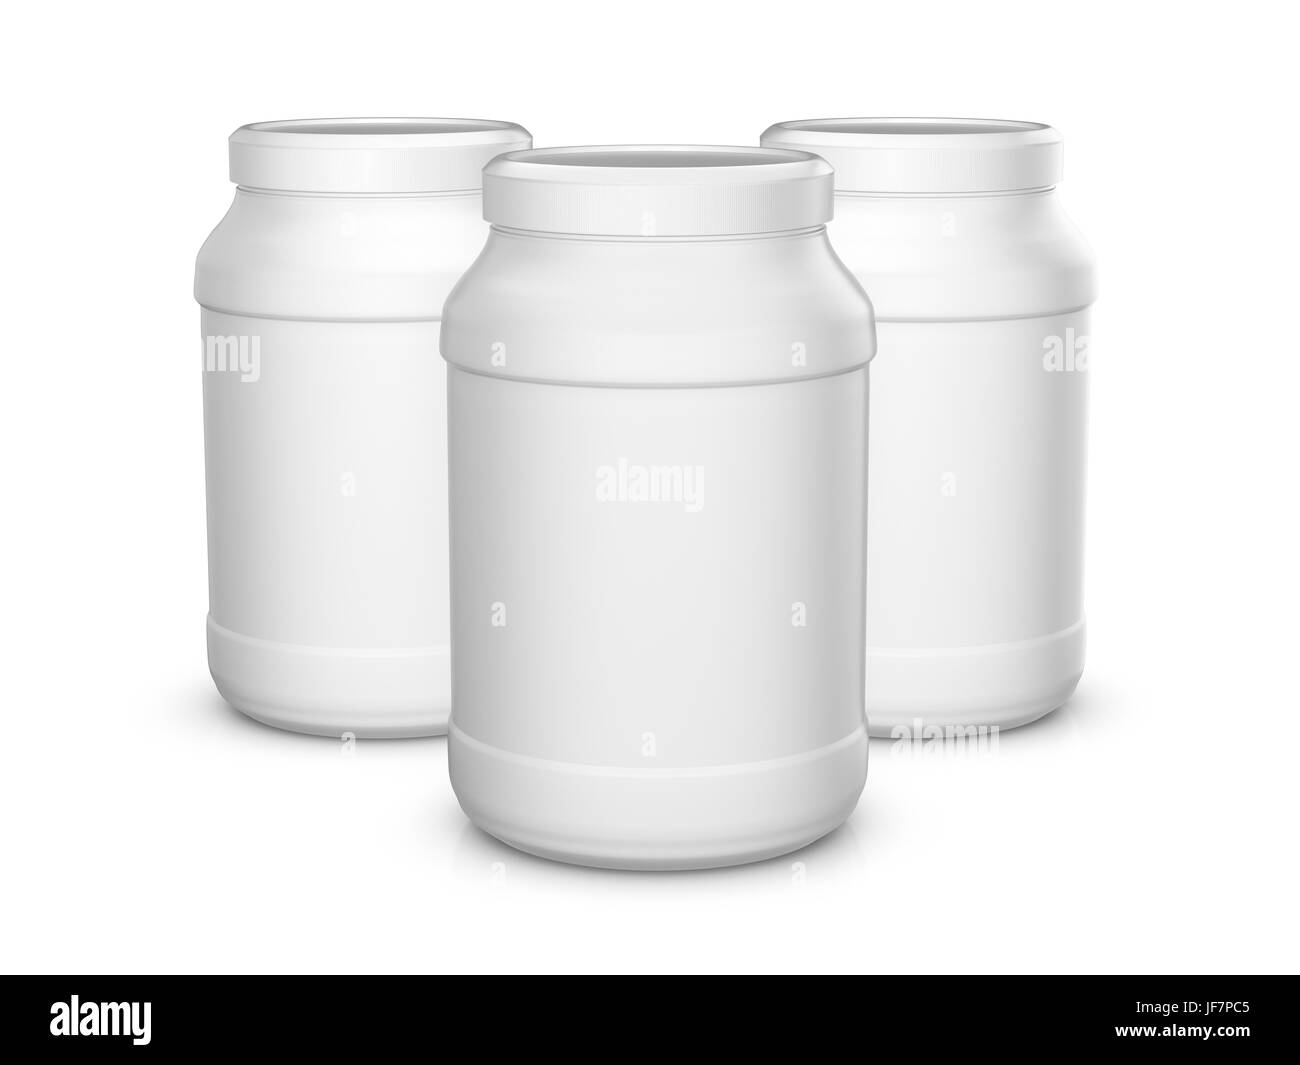 Whey protein bottle container Black and White Stock Photos